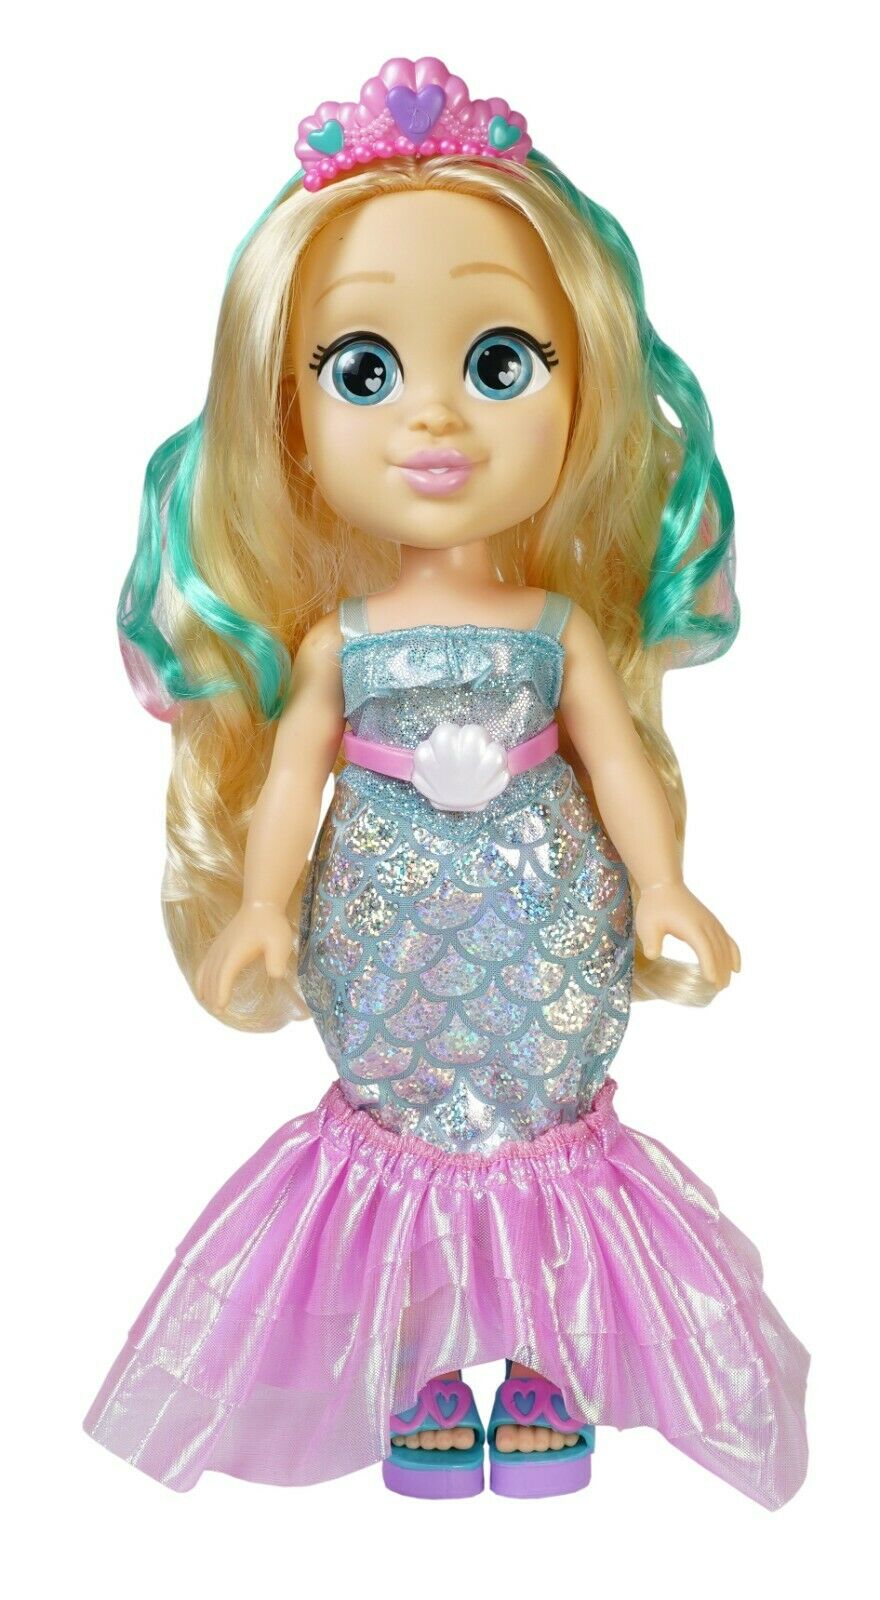 Love Lights Up with Magic Wand and Sparkly Outfit Diana 918981.002 Fairy Diana Doll